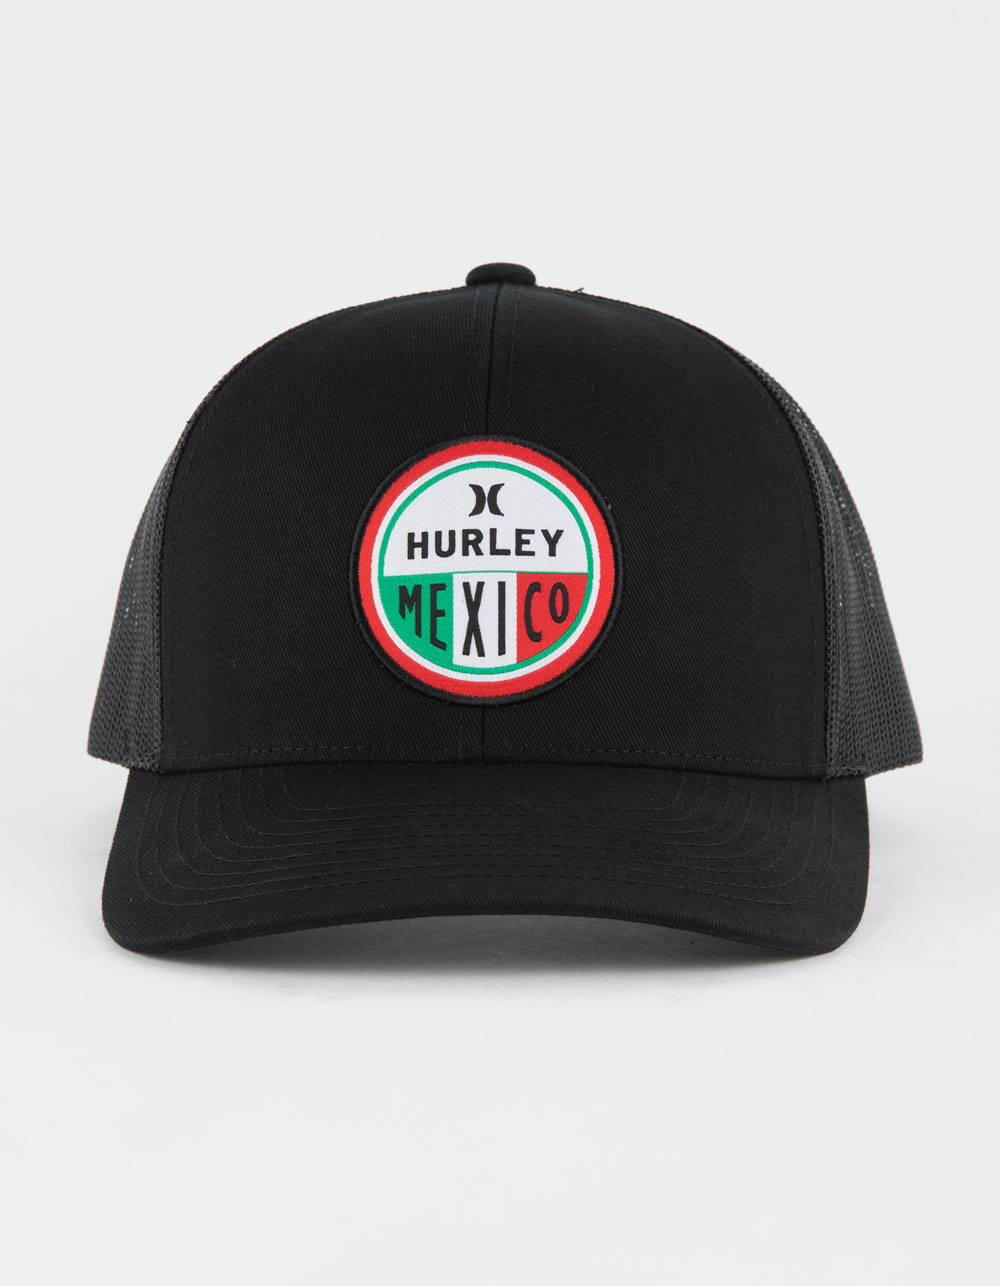 Hurley Local Trucker Hat - Black - One Size